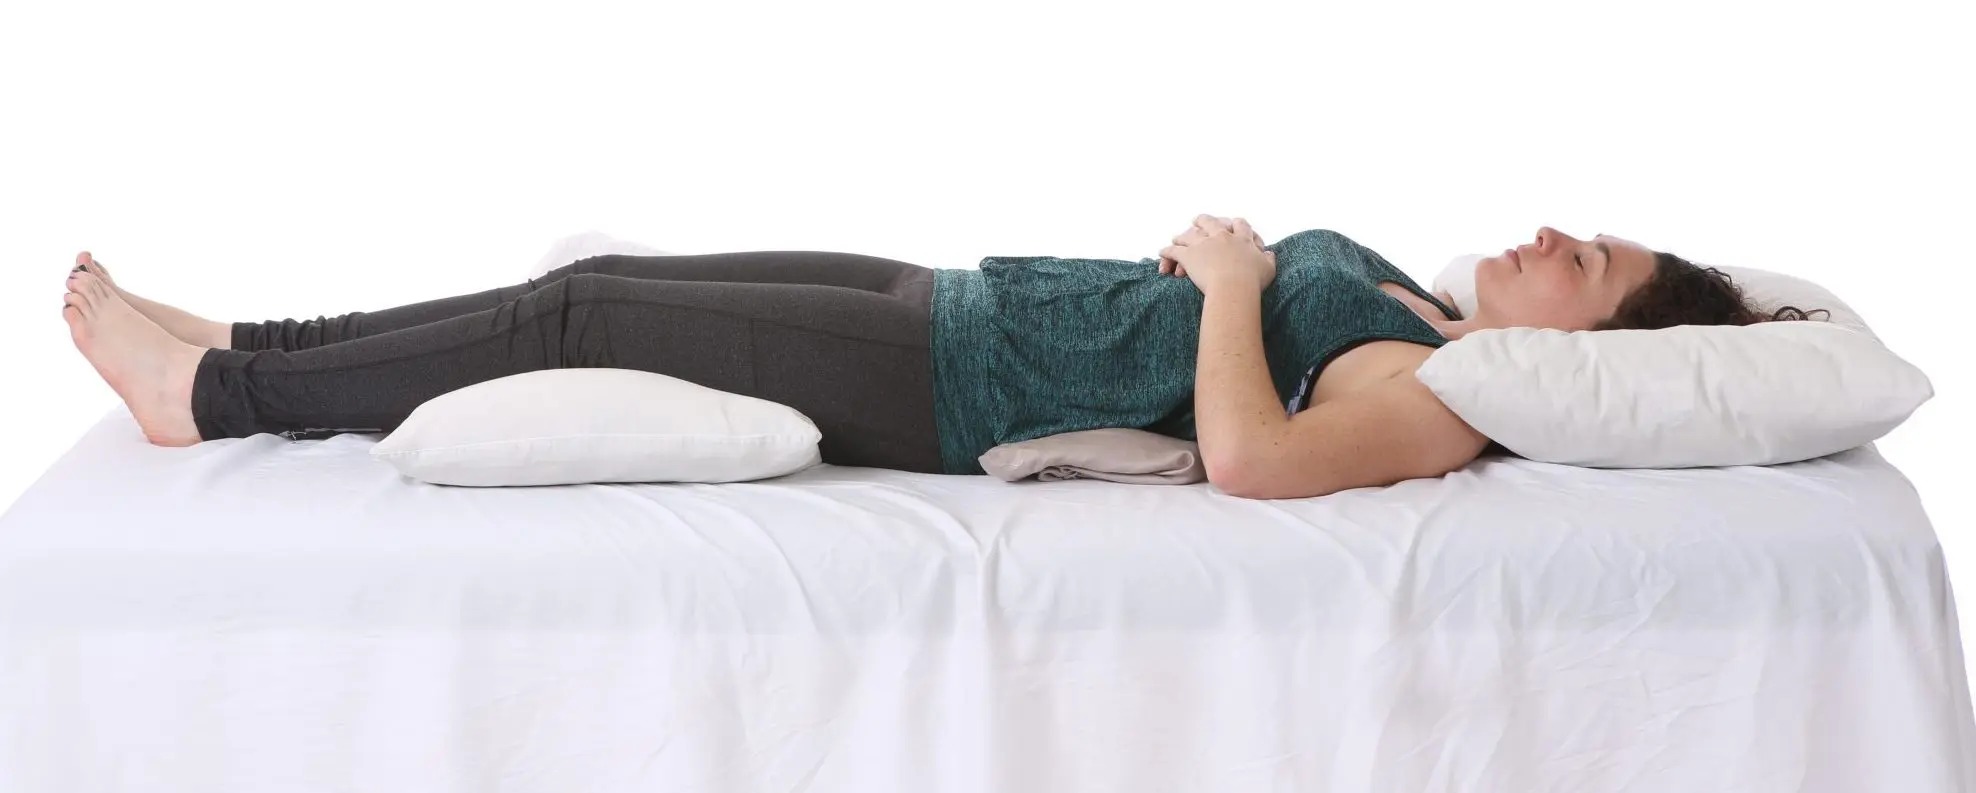 Sleeping on your back can lead to a sore lower back. There is one big pro to this position though: It can help acid reflux.. To make it better for your back: place a pillow or rolled-up towel under your knees. It can also result to more difficulty of breathing. Which causes stress. which = nightmare